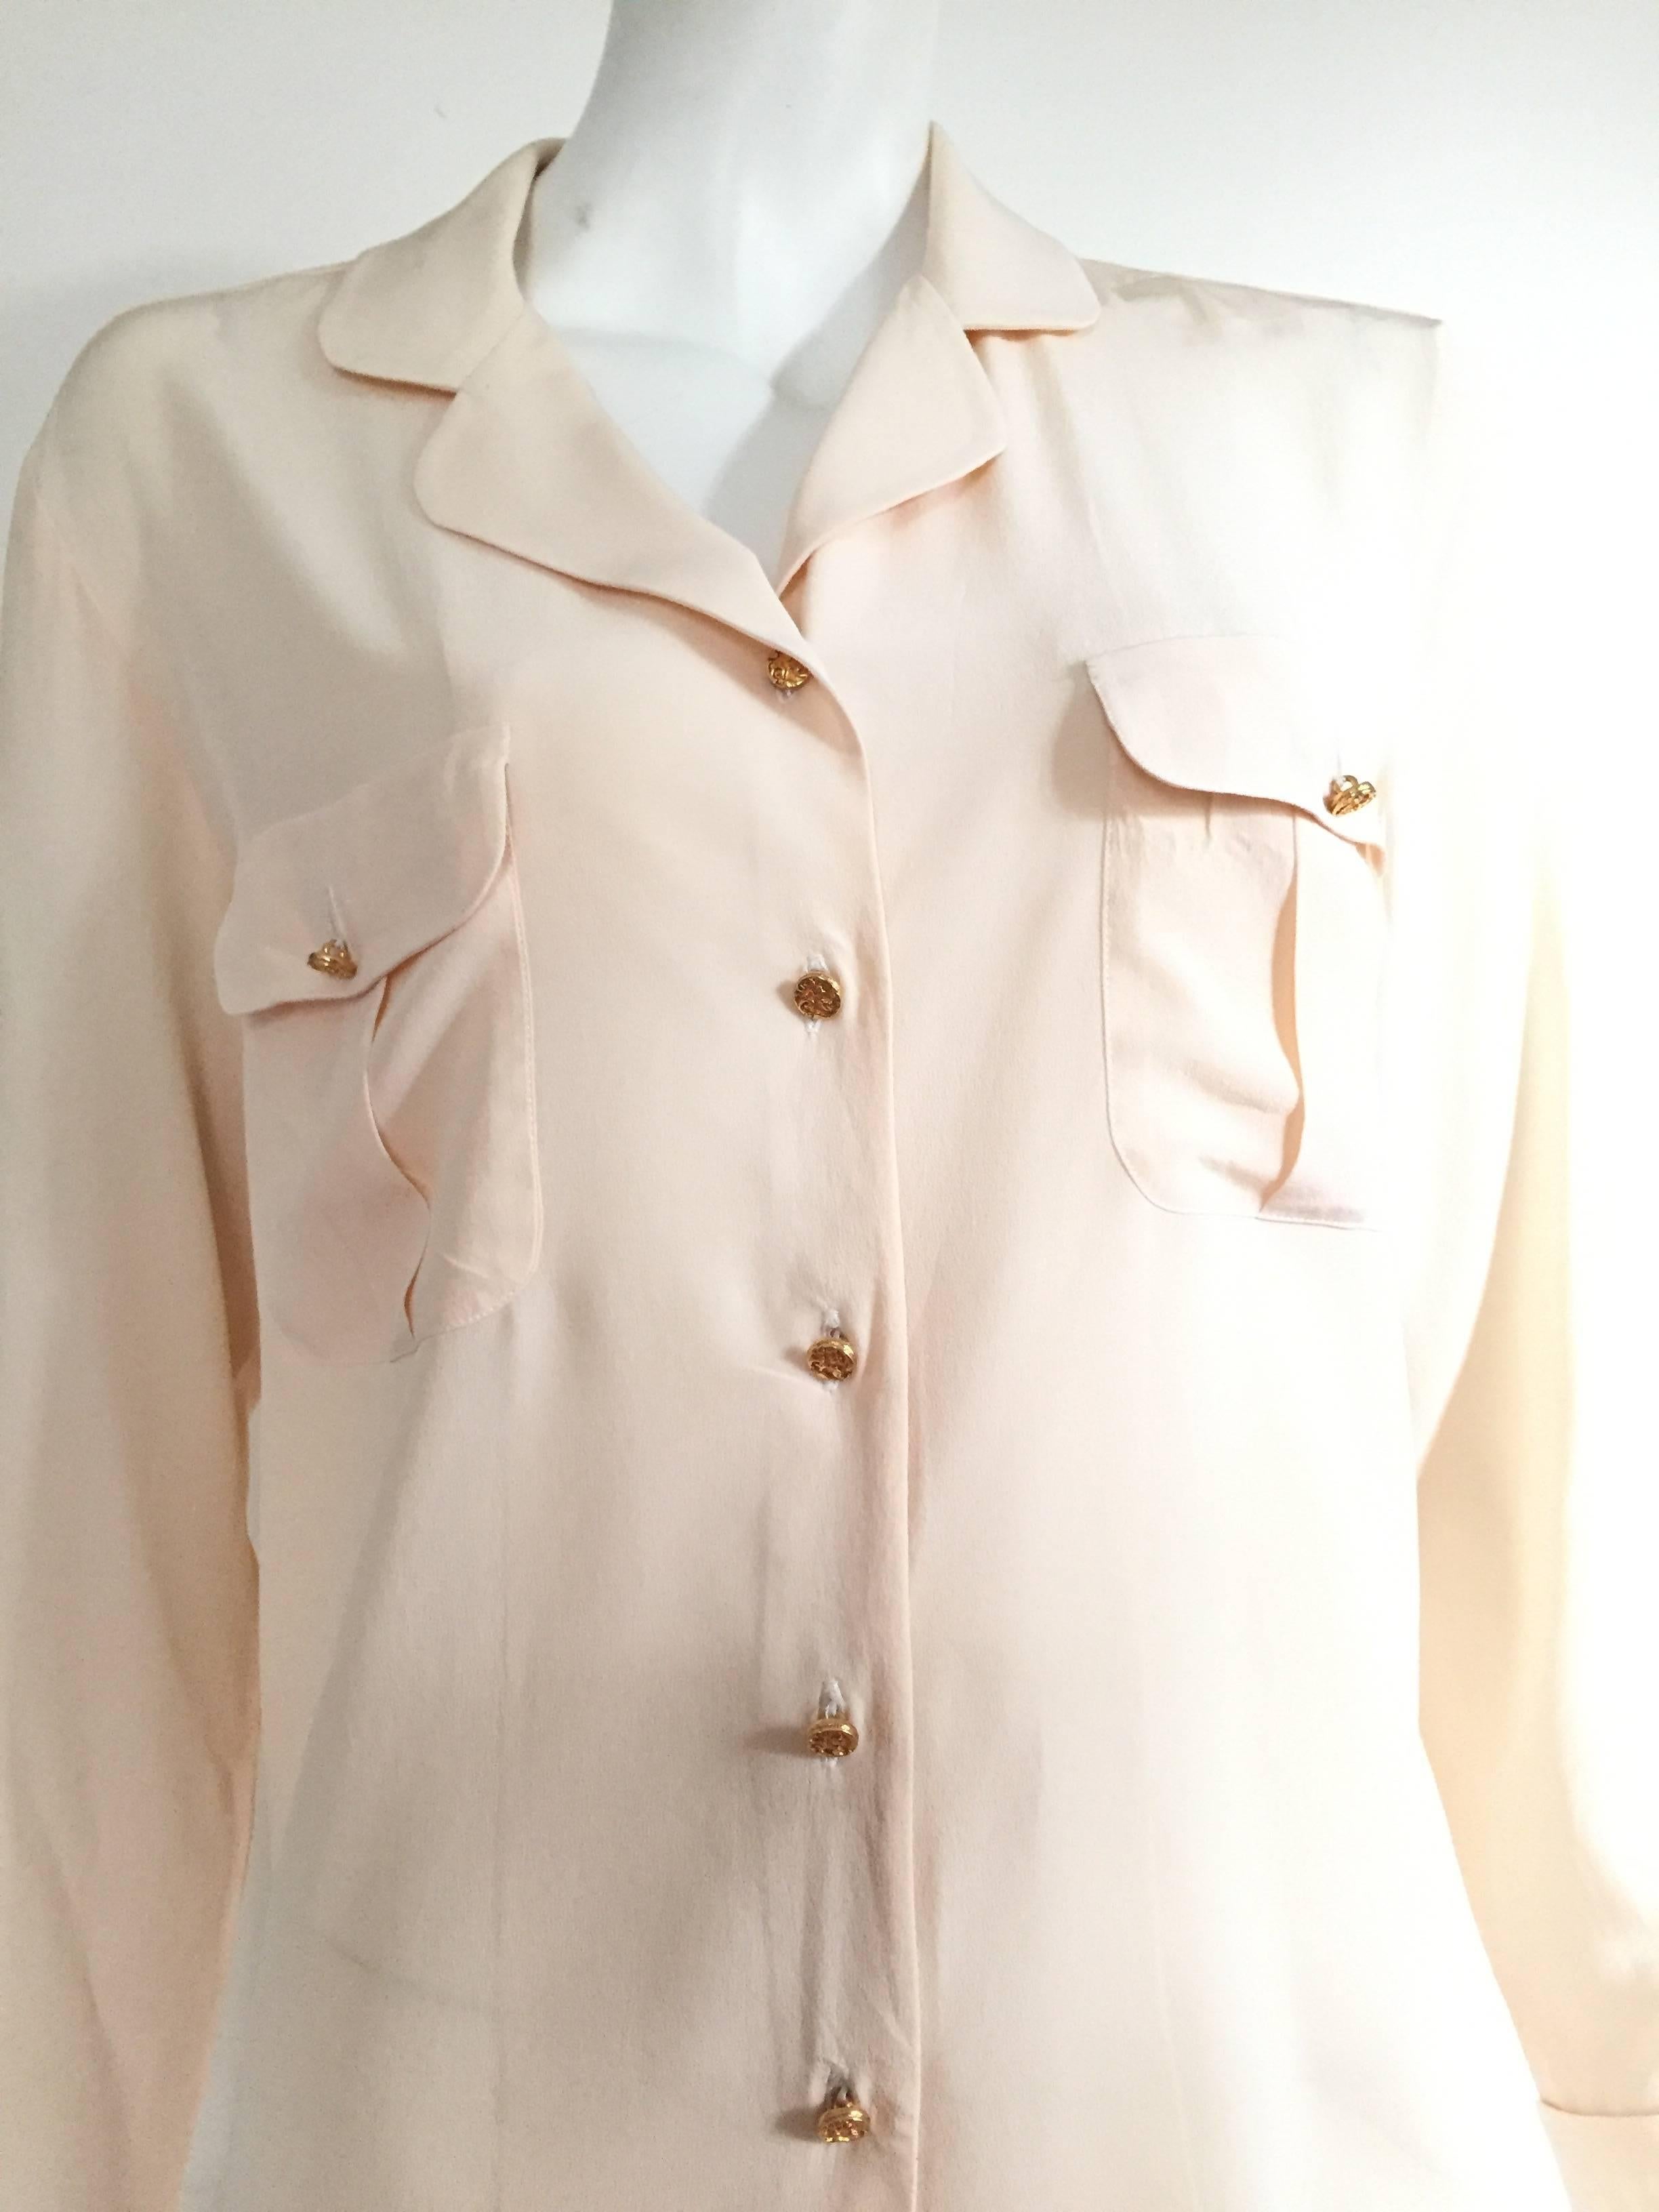 Chanel 1980s cream silk long sleeve blouse with gold buttons and front pockets and French cuff sleeves is a size 6 ( Please see & use the measurements below to properly measure your lovely body to make sure this blouse will fit you the way Coco